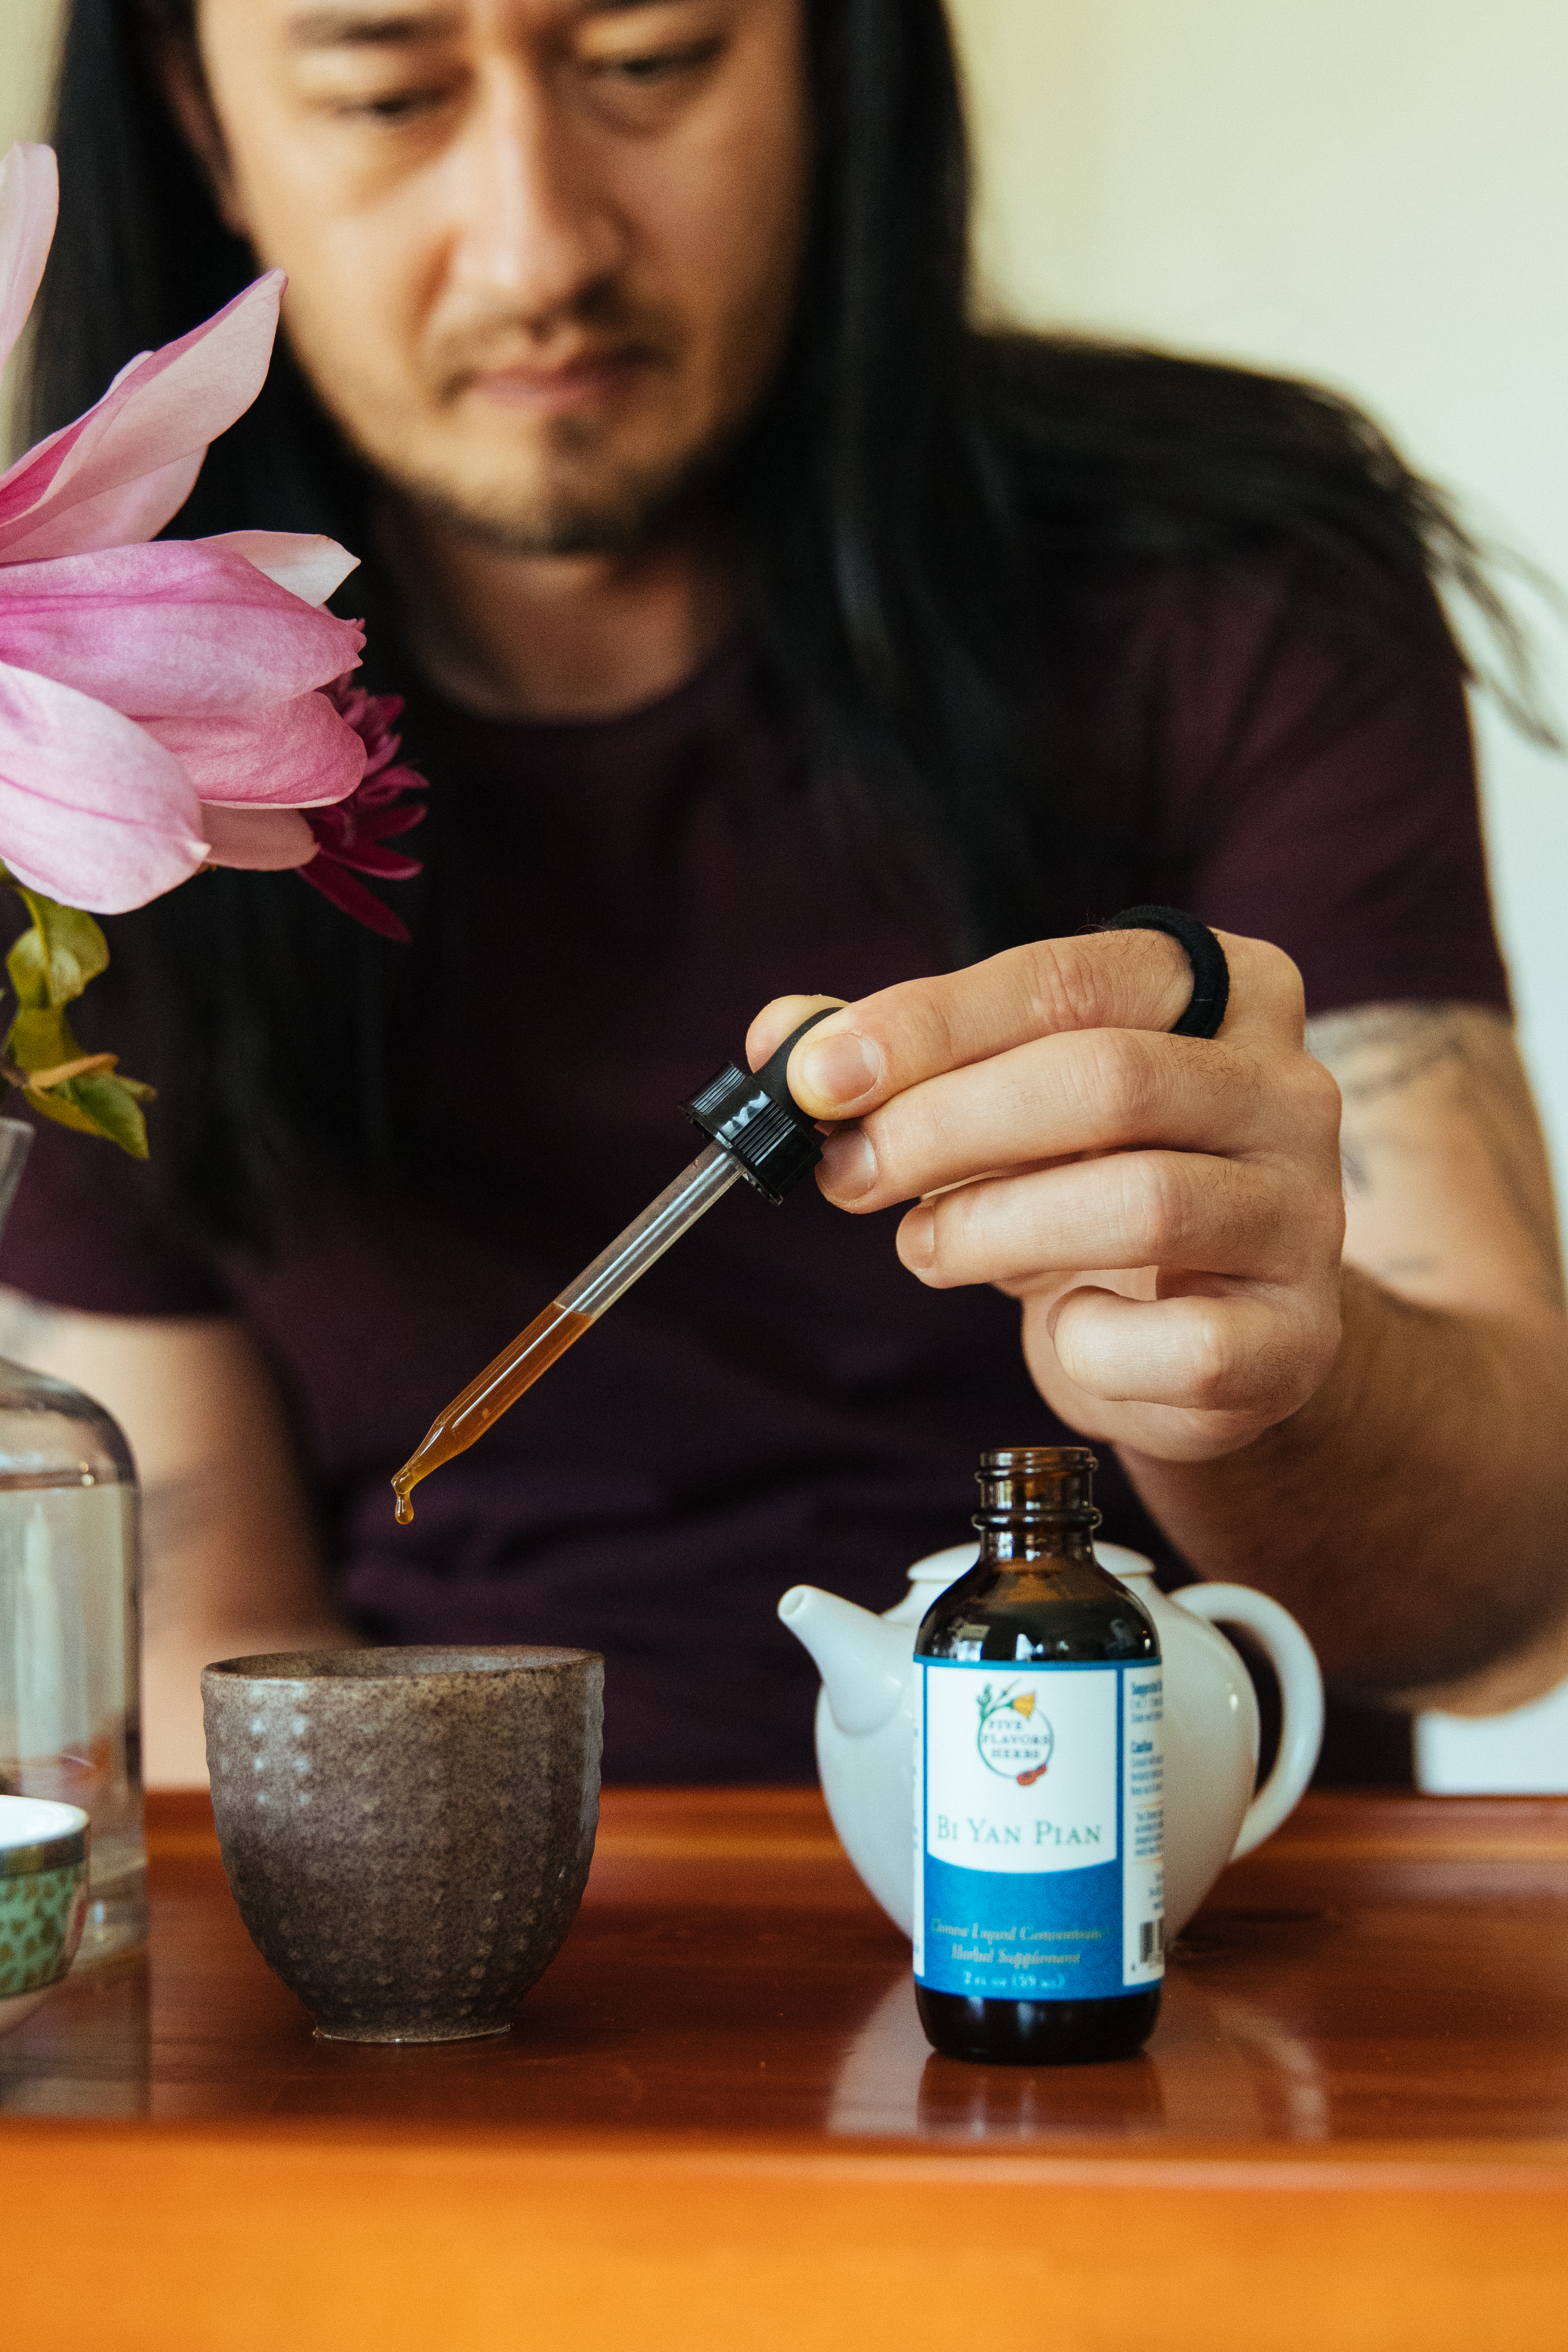 young-man-with-long-hair-dropping-bi-yan-pian-chinese-tincture-formula-for-spring-allergies-into-a-cup-of-tea-with-magnolia-blossoms-to-the-side